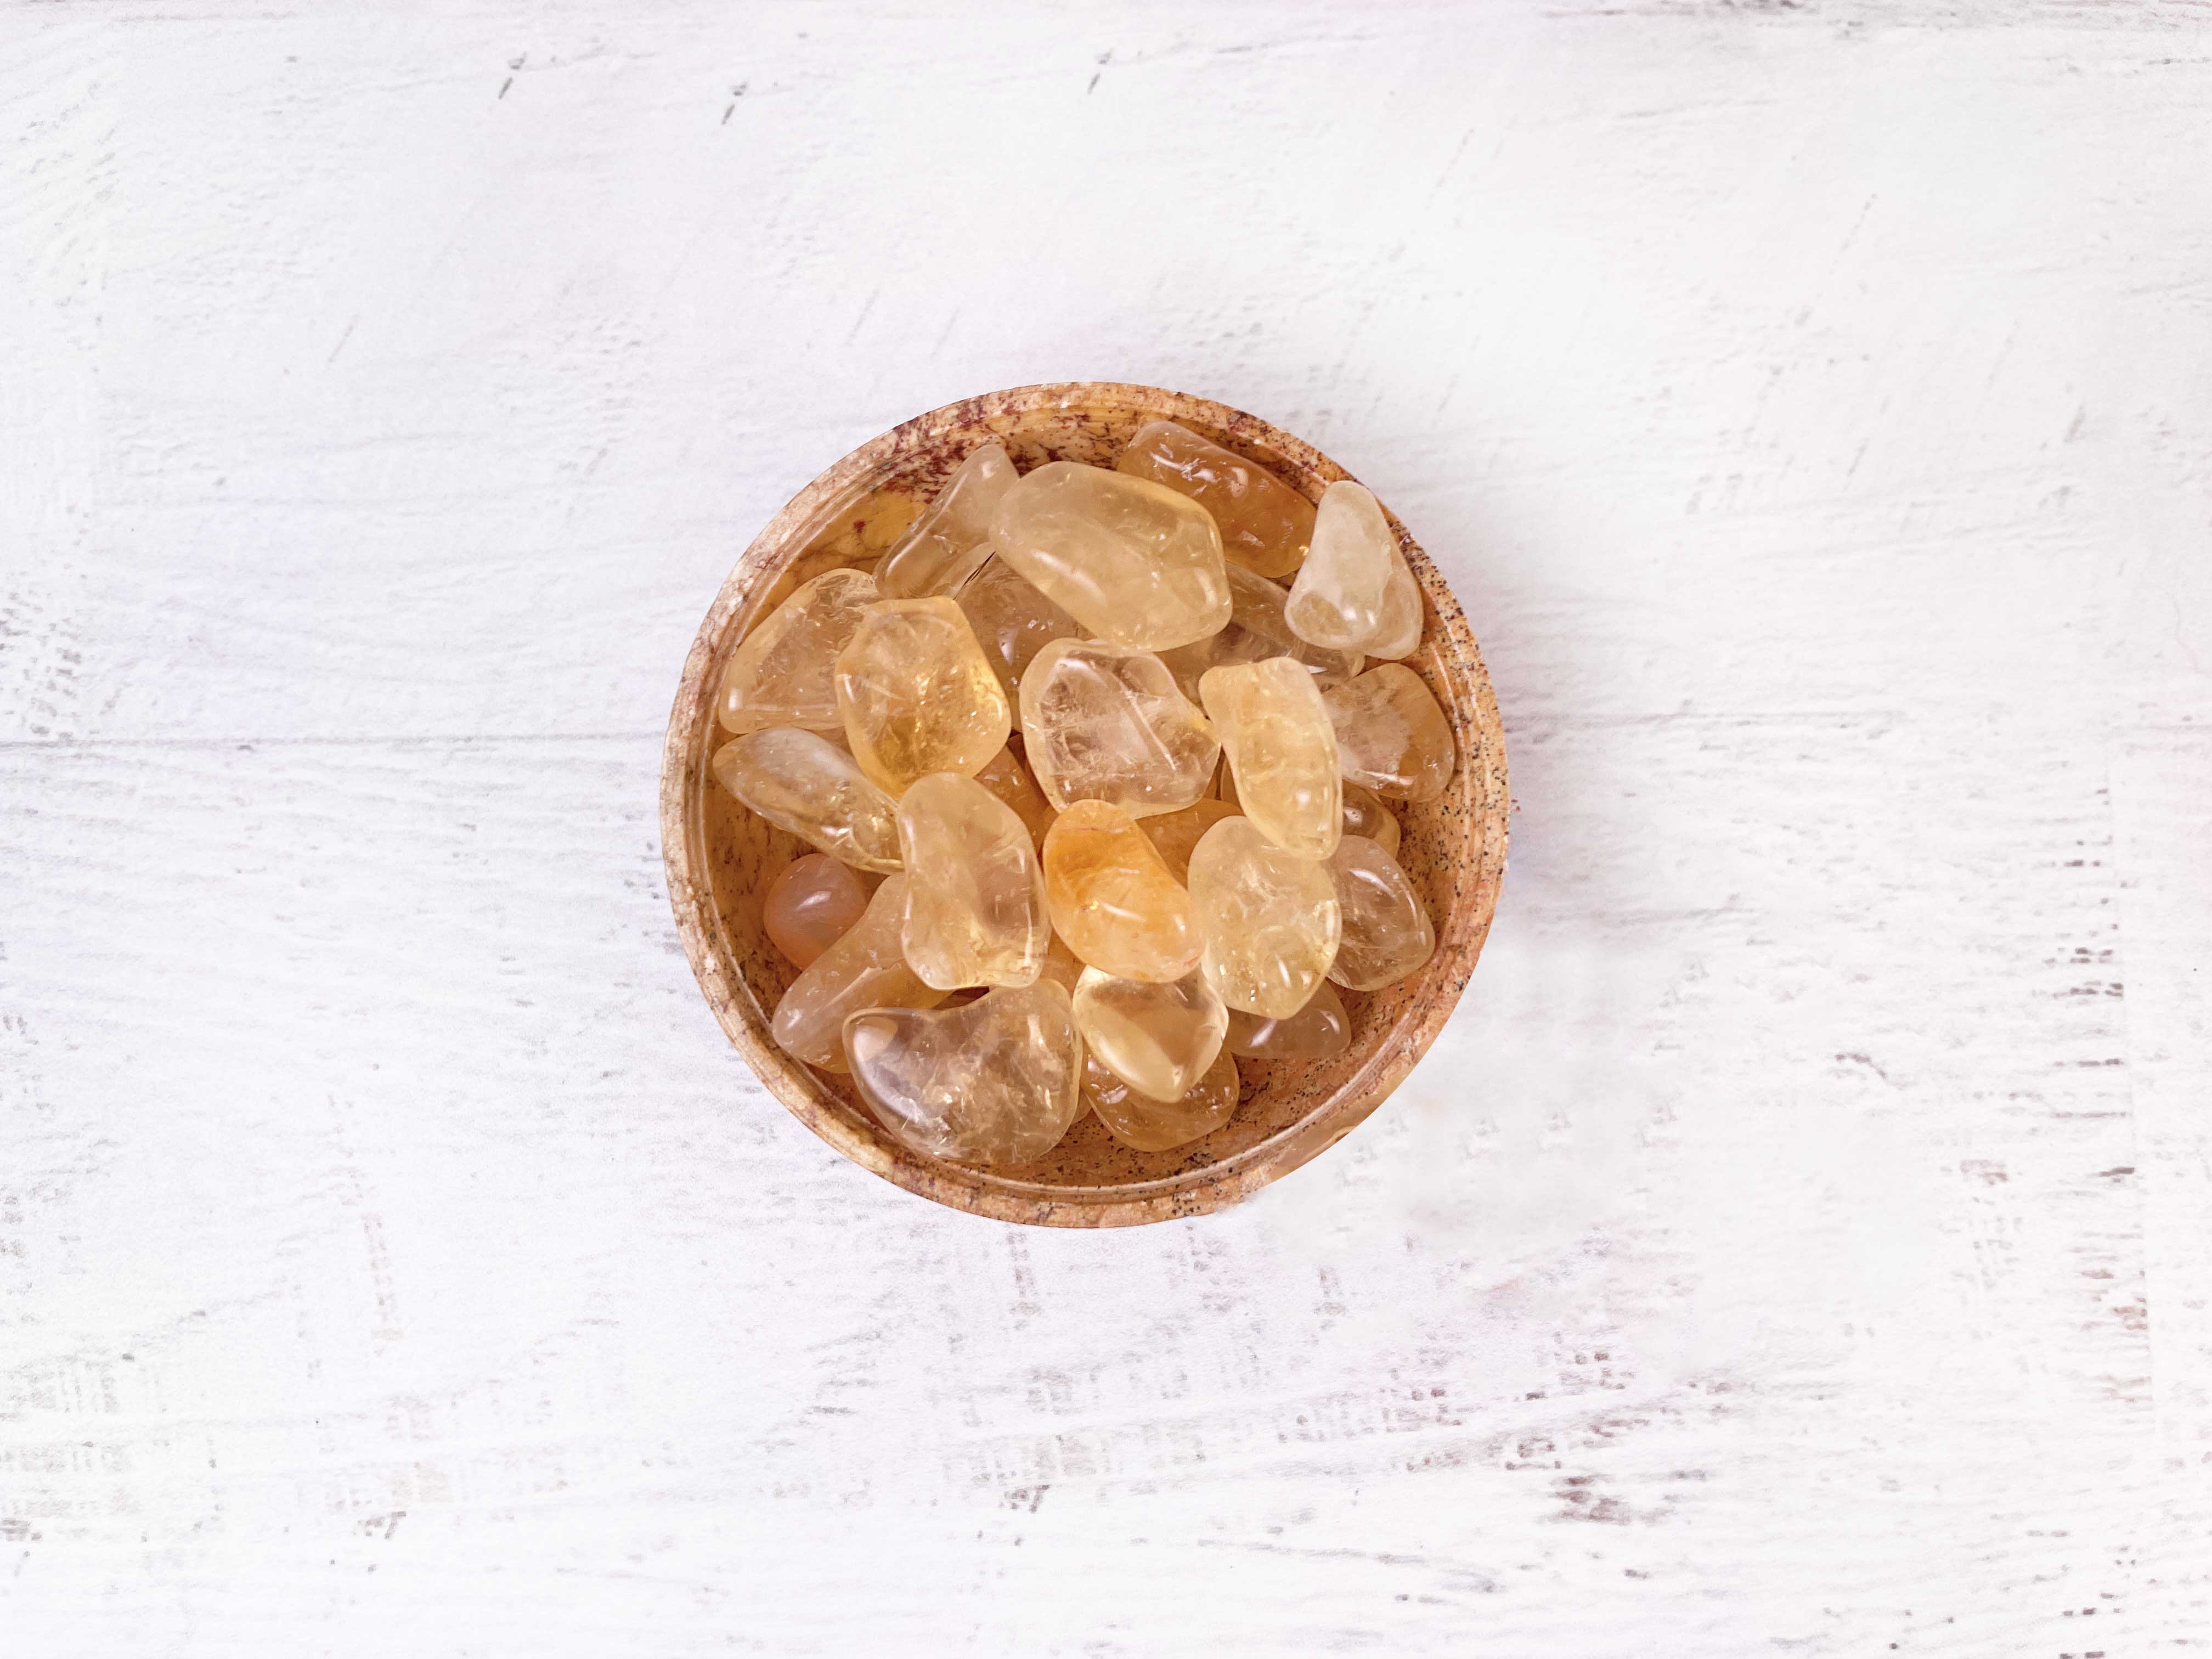 Buy Online Latest and Unique Tumbled Citrine - Happiness, Joy, Abundance, Creativity Clarity | Shop Best Spiritual Items - The Mystical Ritual